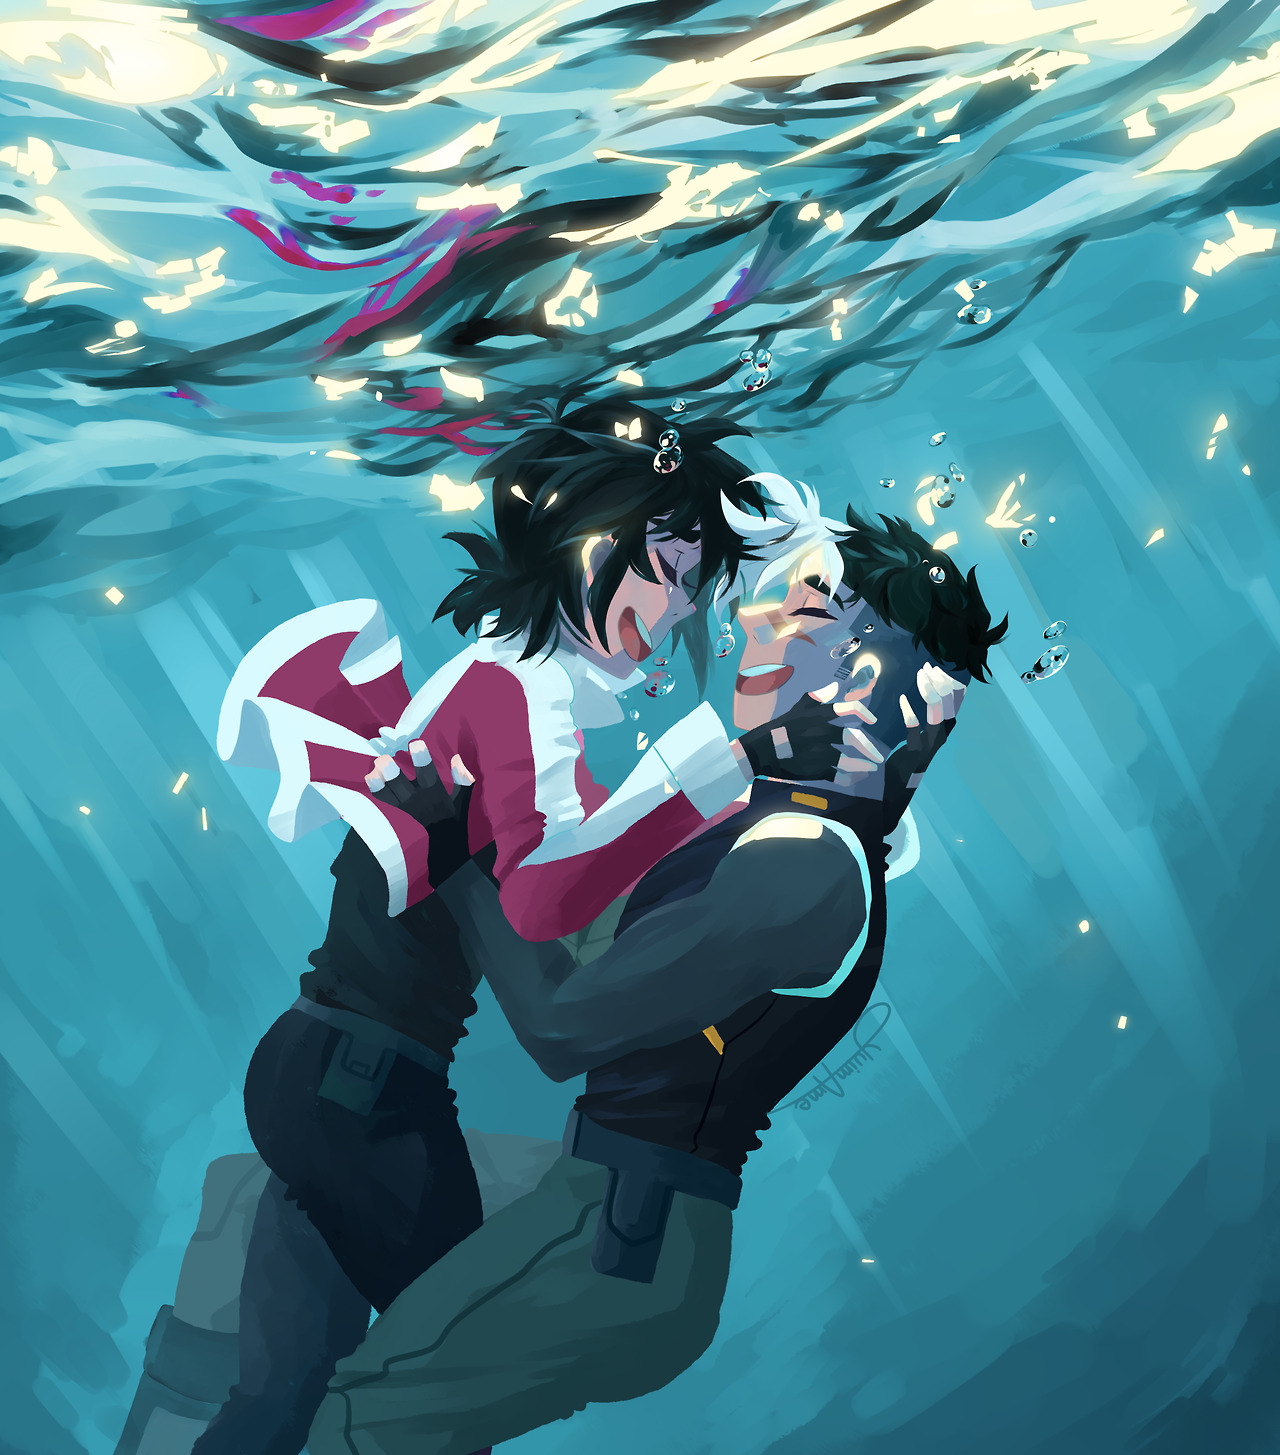 Voltron For All! — ames-rain: I had to practice some underwater...